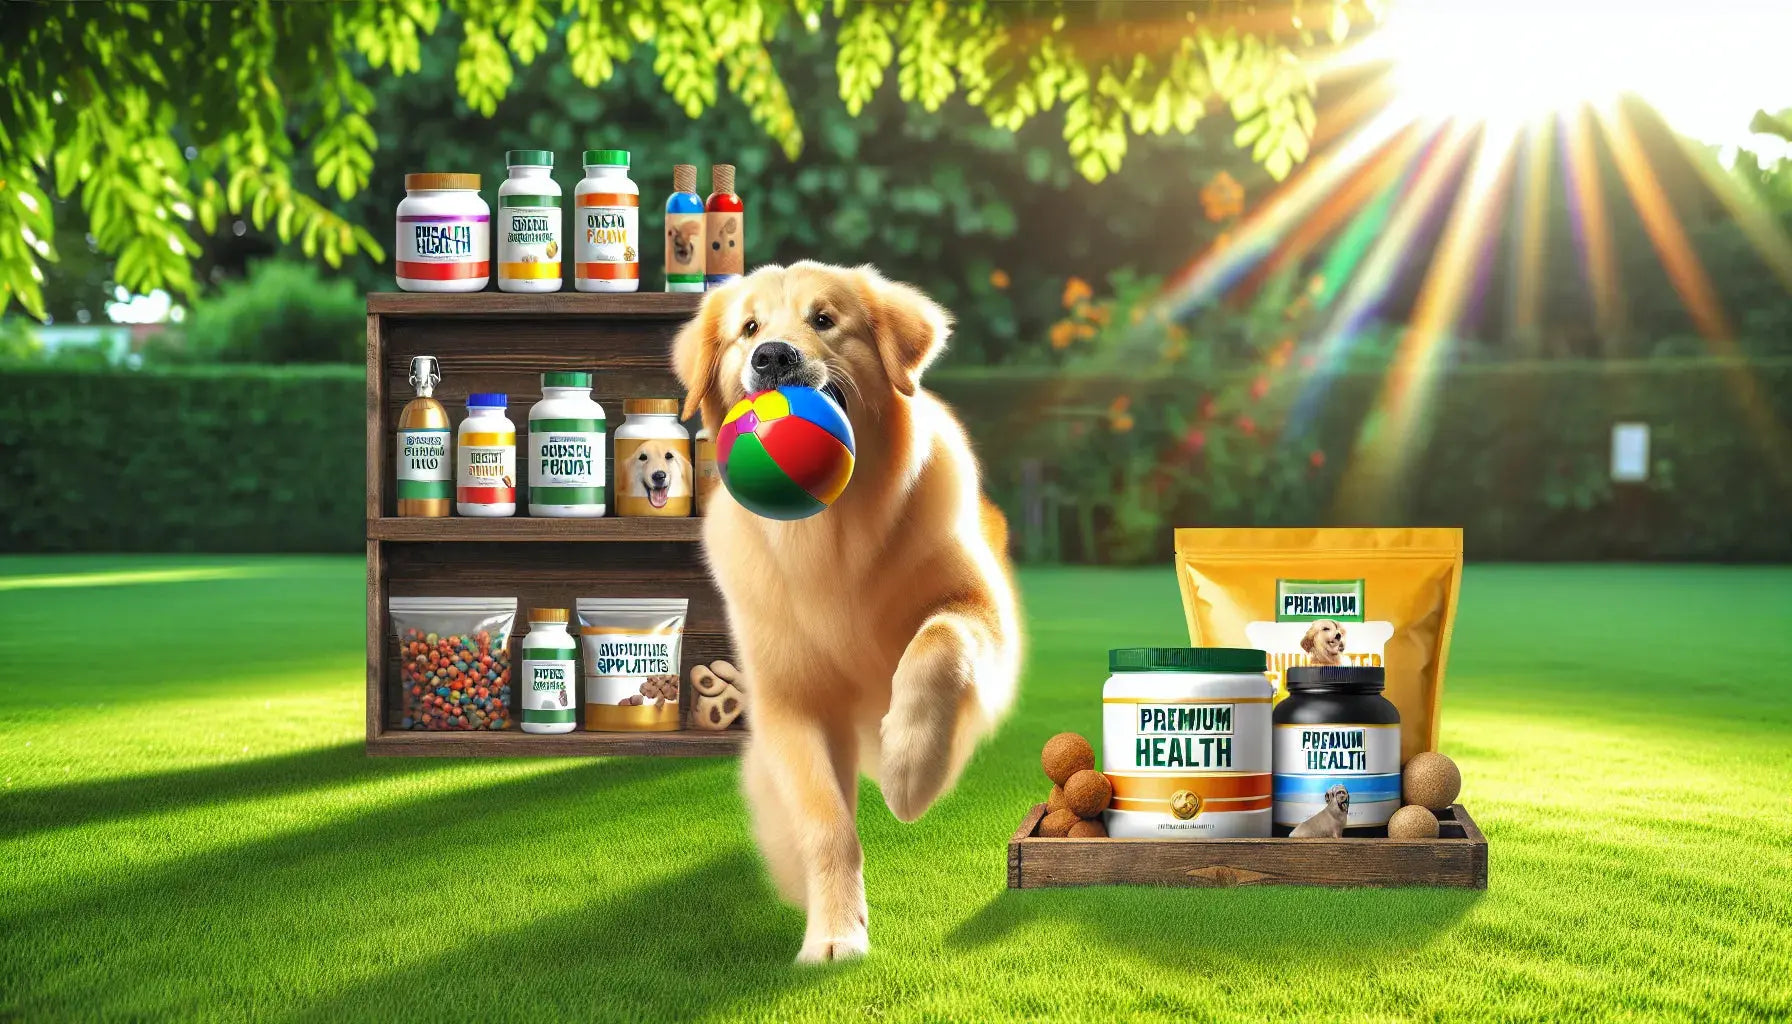 Keep Your Pet in Top Shape with Premium Health Products